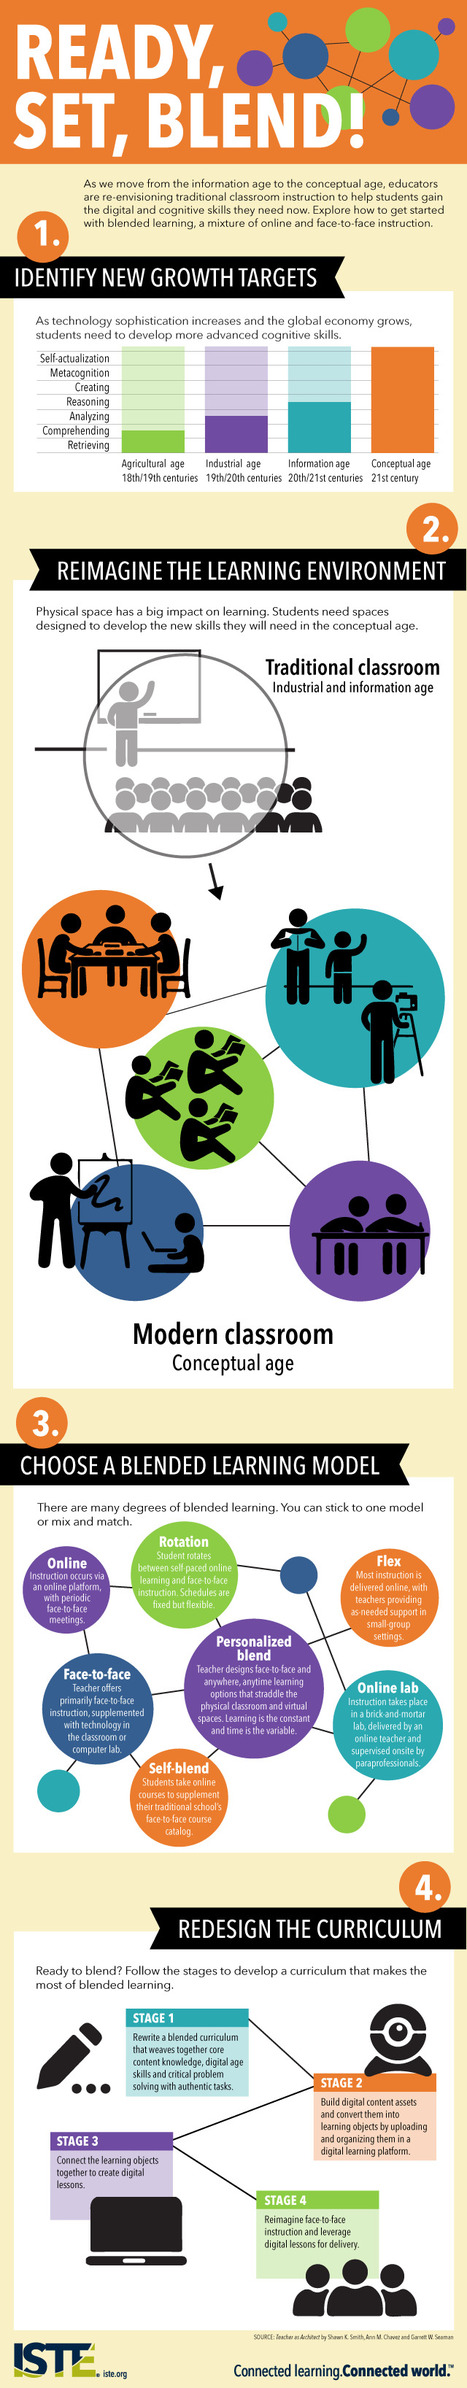 ISTE Infographic: Ready, set, blend! | Education 2.0 & 3.0 | Scoop.it